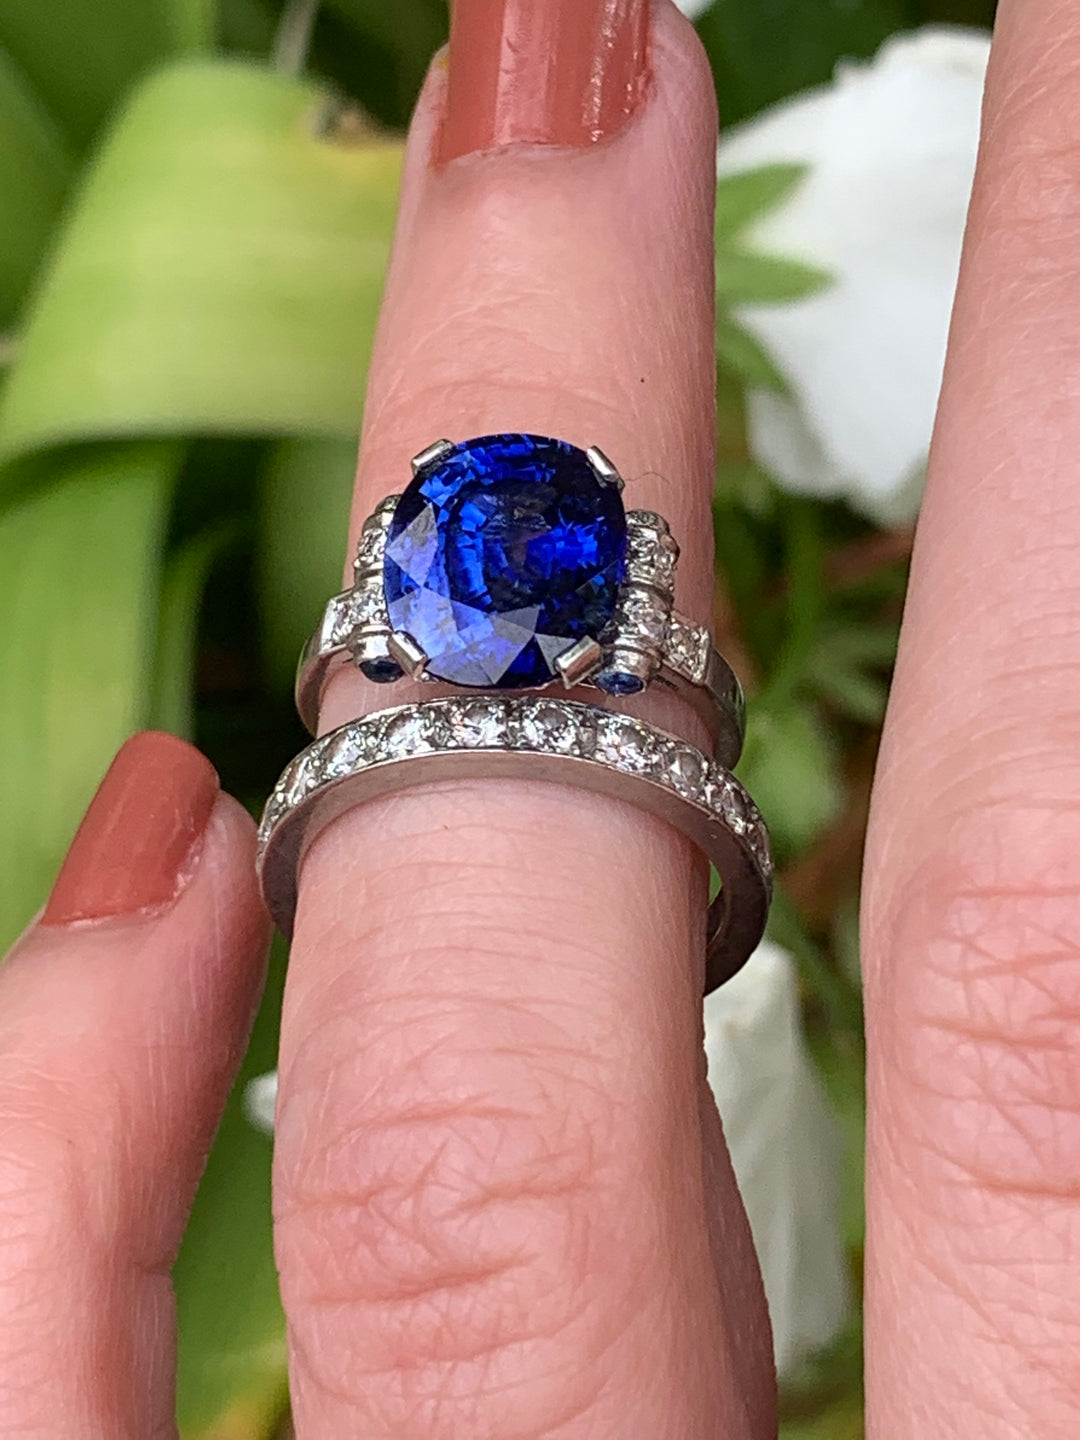 Vintage French Sapphire and Diamond Ring